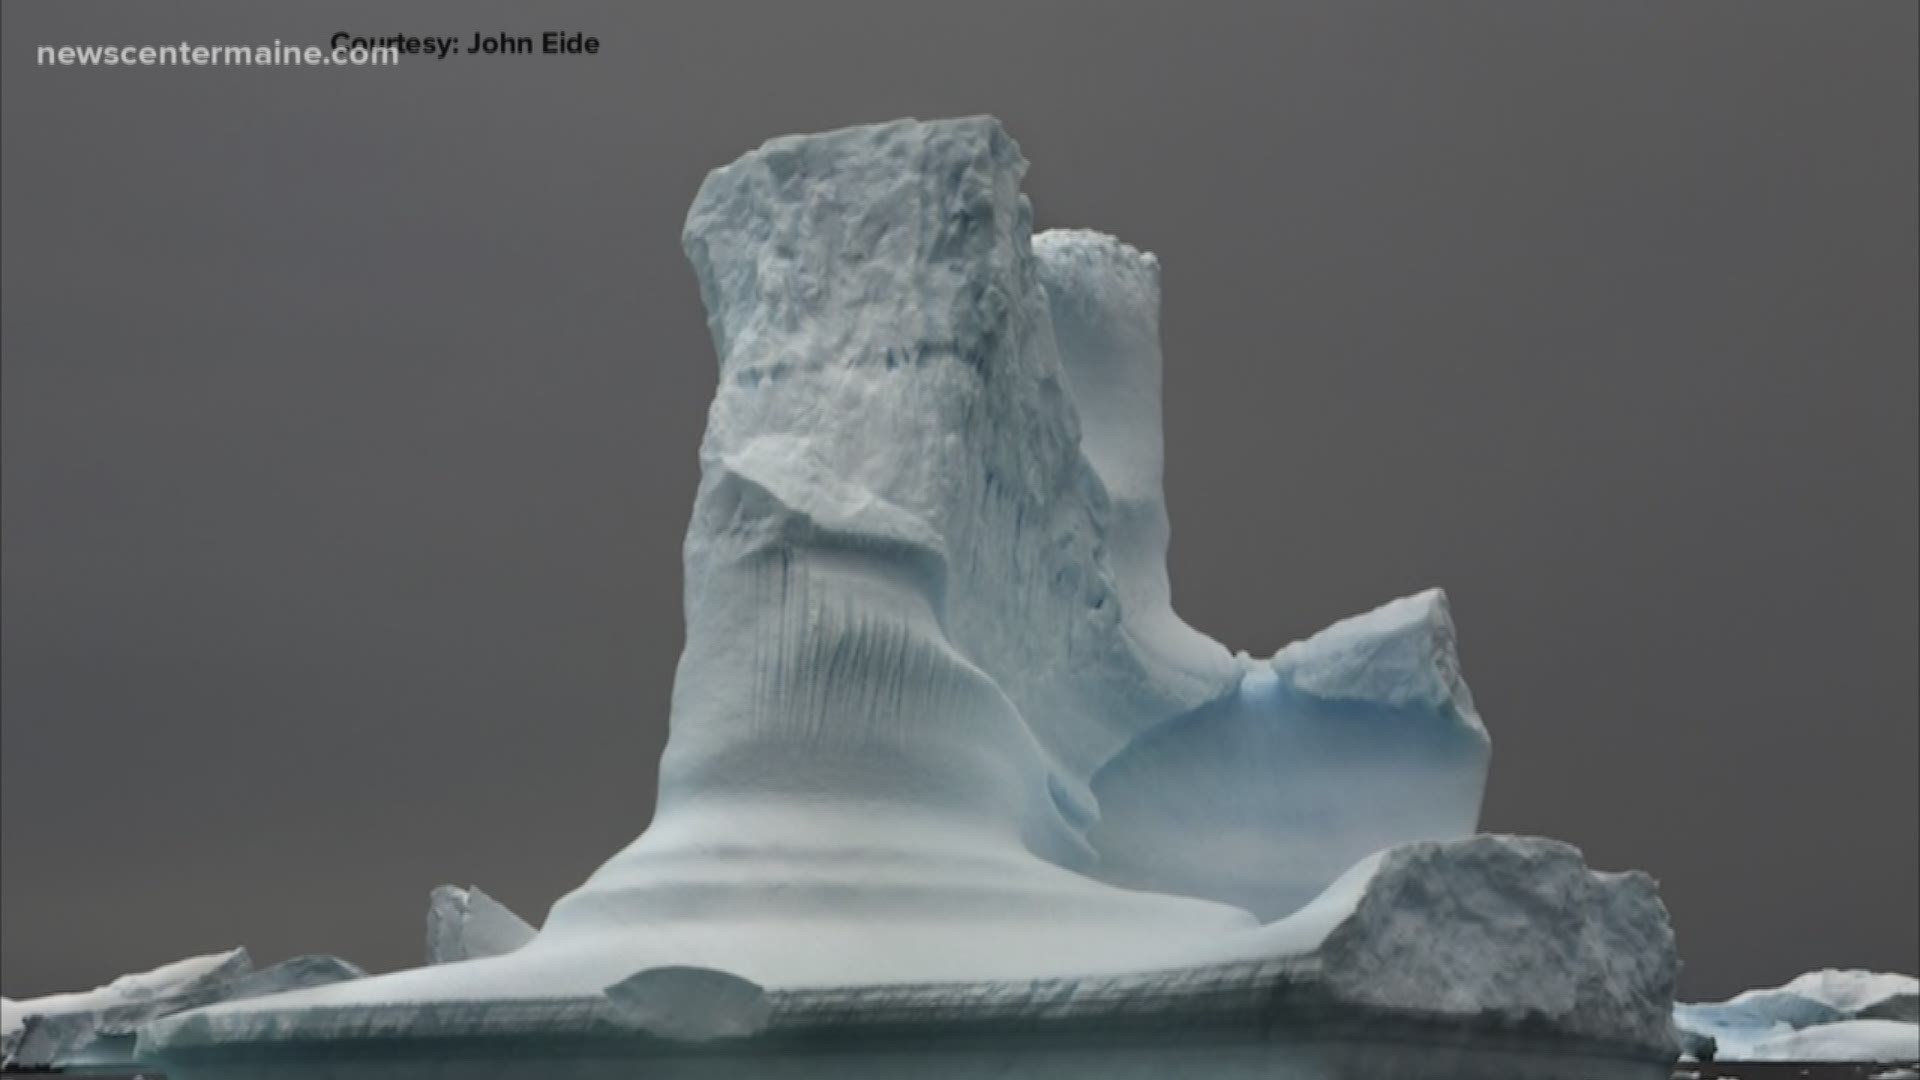 CMCA has a new exhibit. Meltdown looks at the melting ice scapes of the poles.